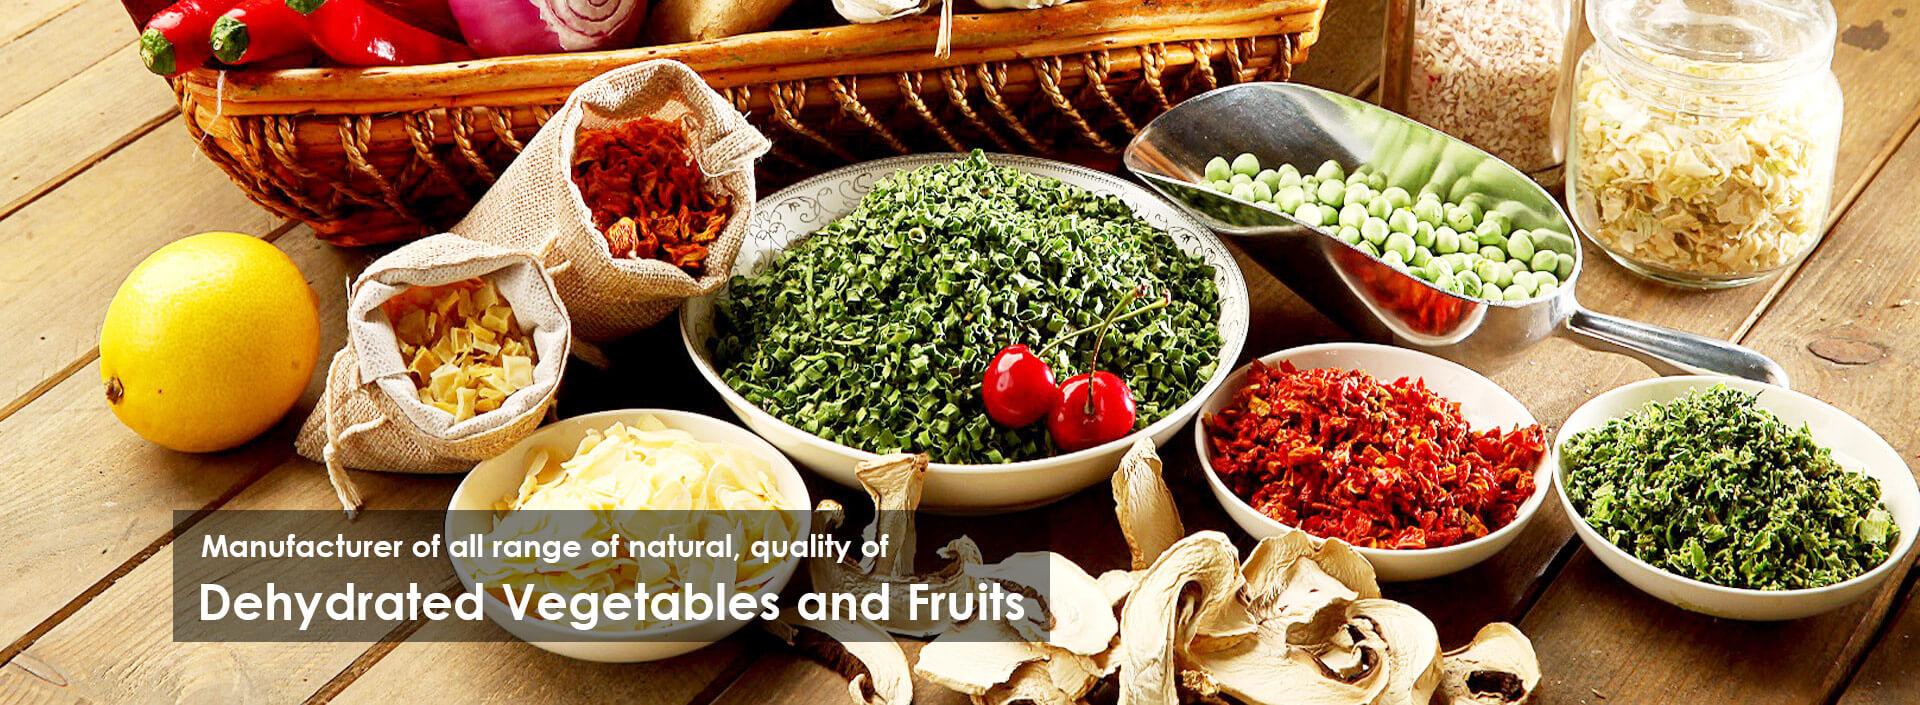 Manufacturer of all range of natural quality dehydrated vegetables and fruits